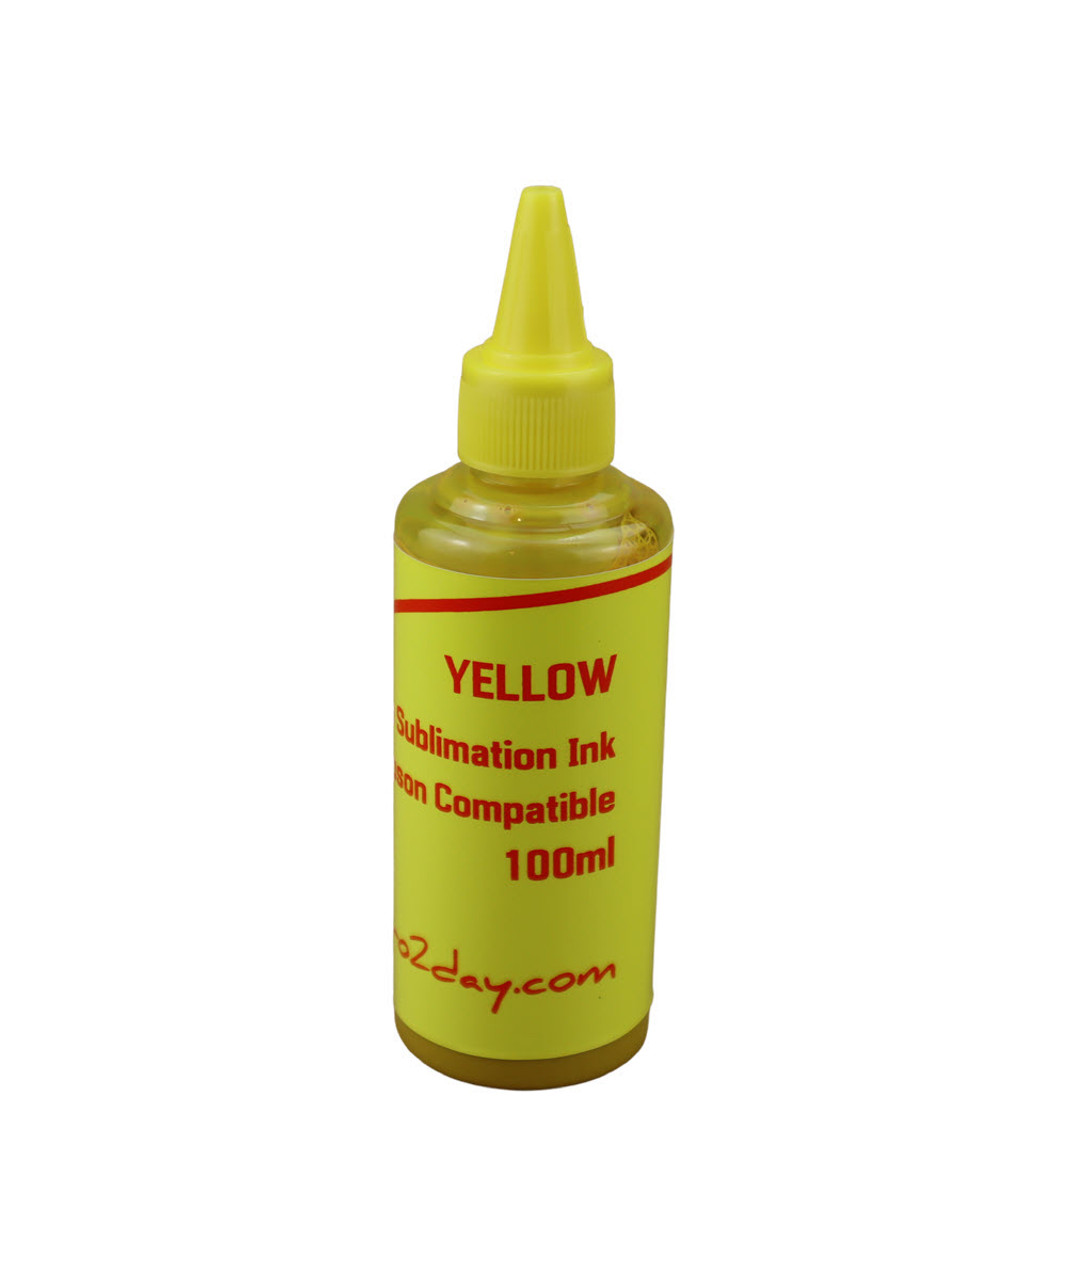 Yellow Dye Sublimation Ink 100ml Bottle for Epson Expression Photo HD XP-15000 Printer